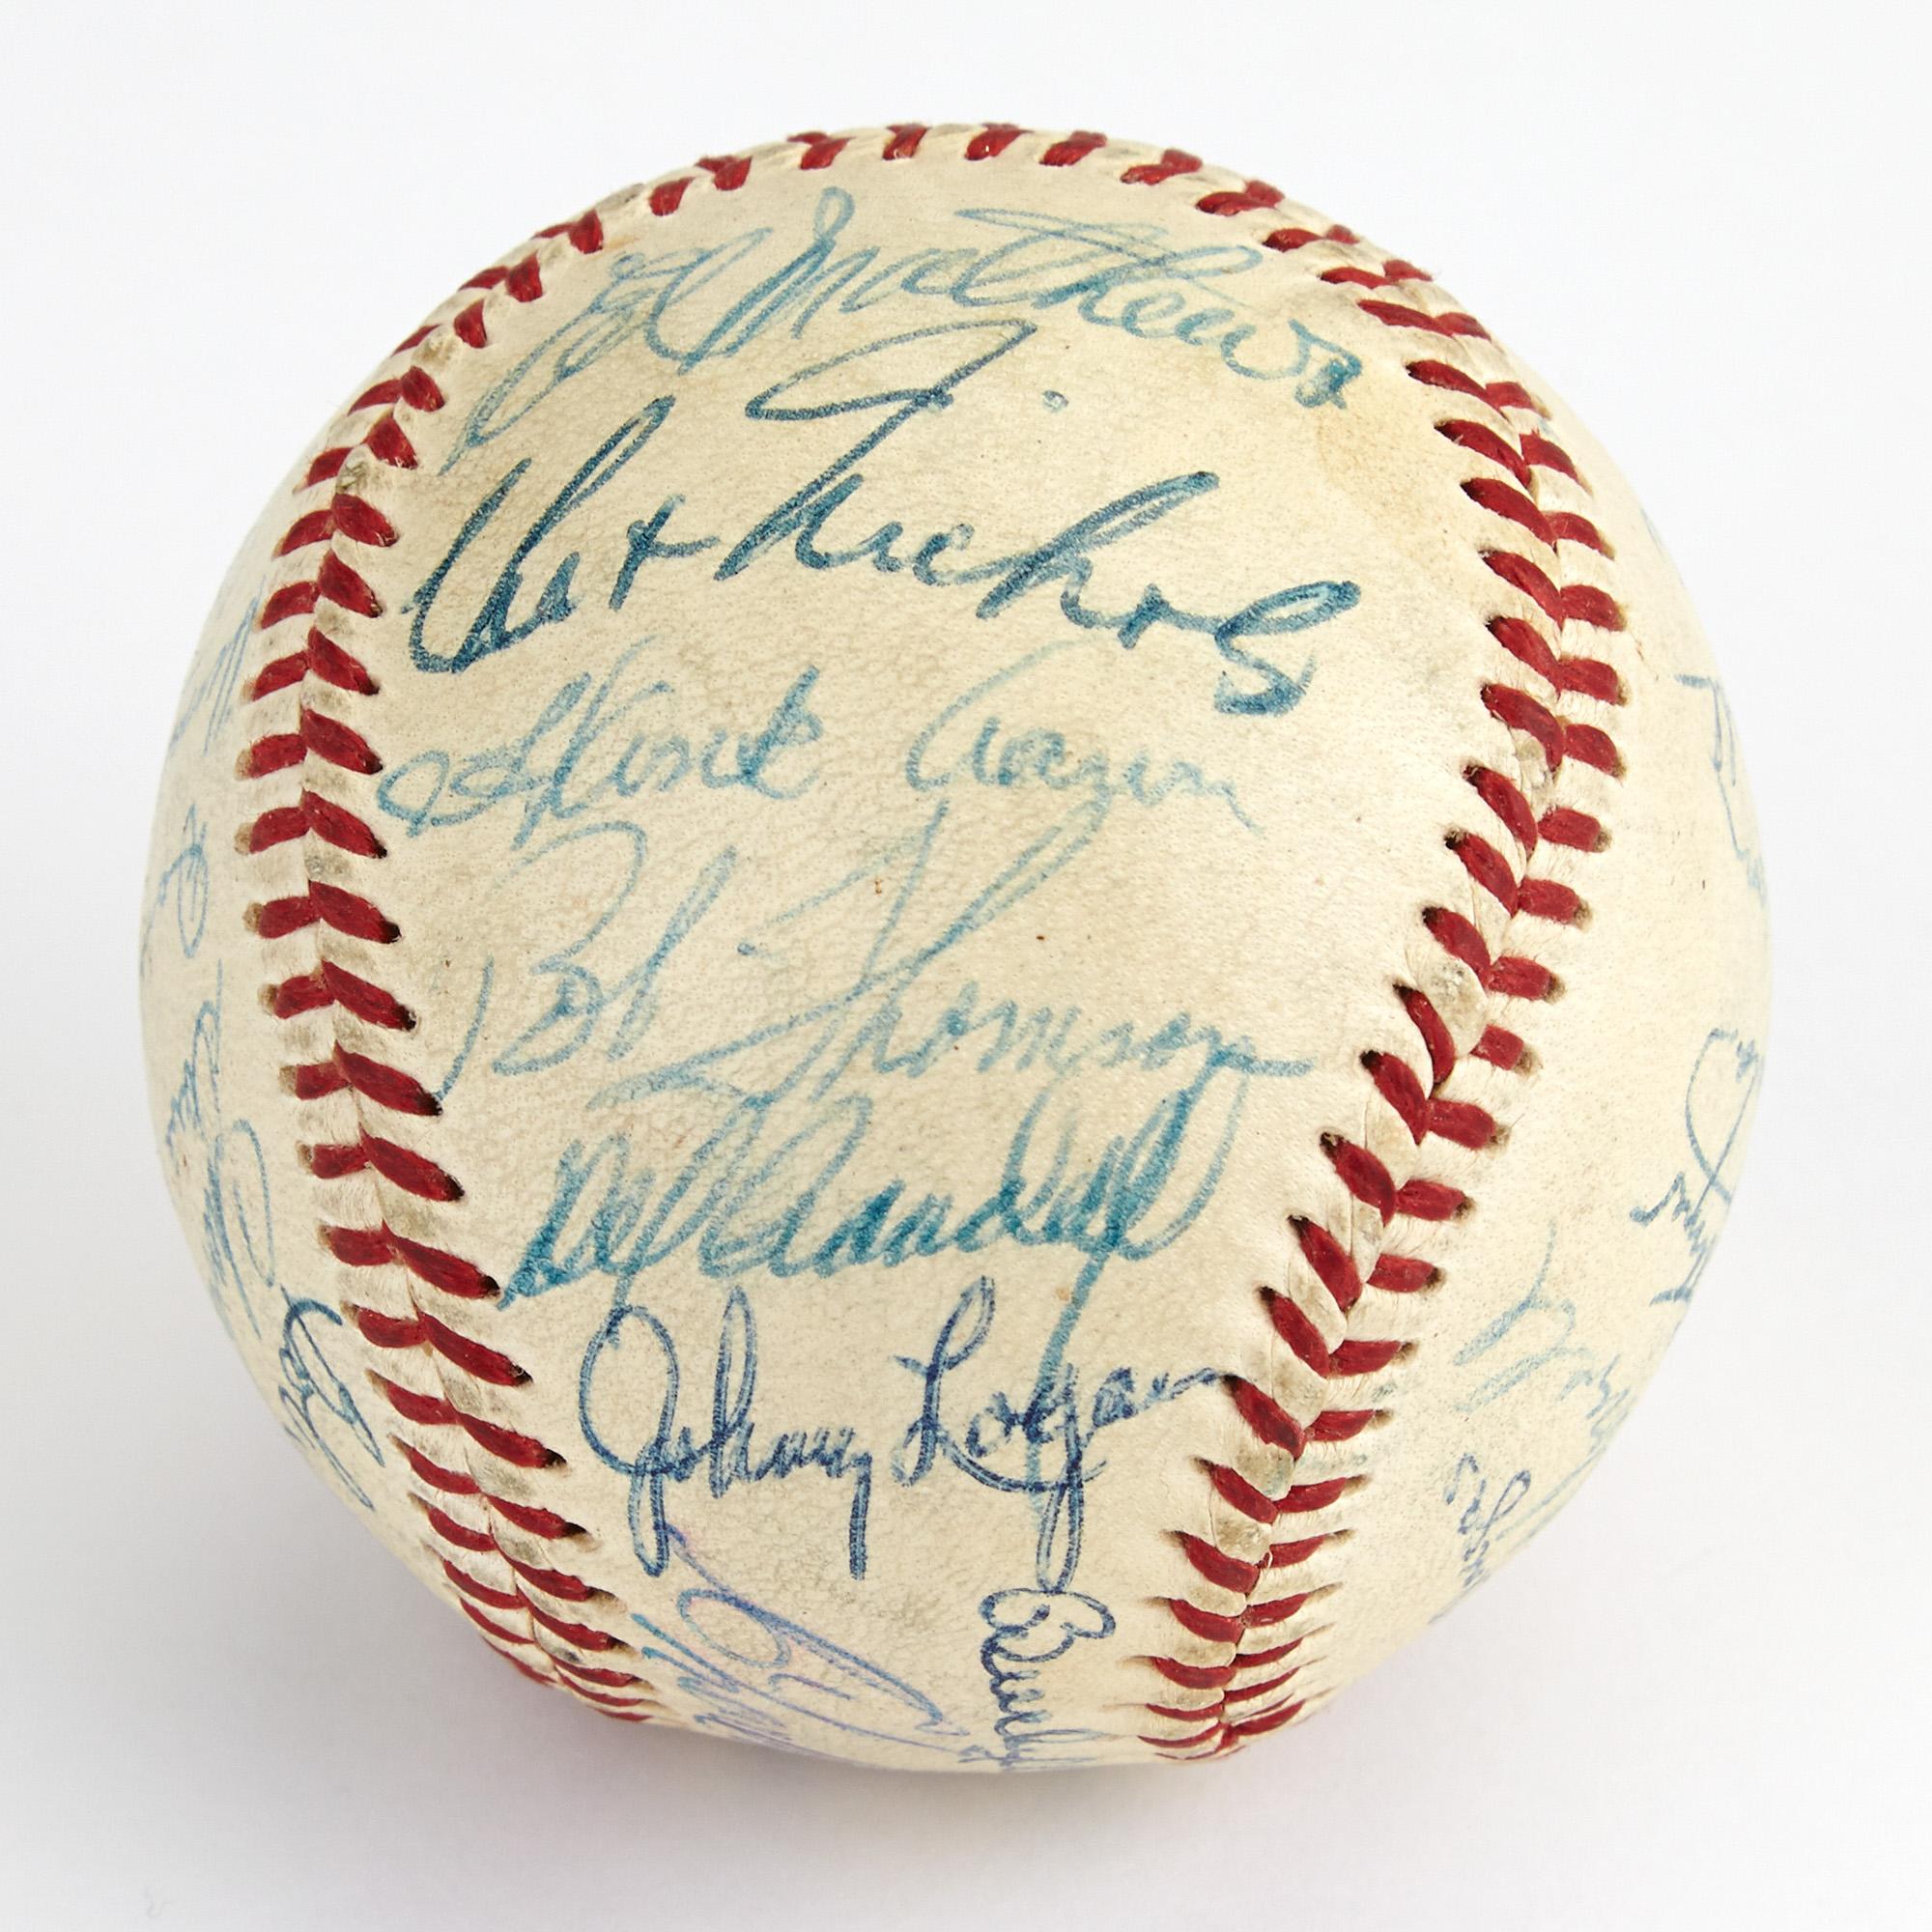 Baseball, signed by the 1953 Milwaukee Braves